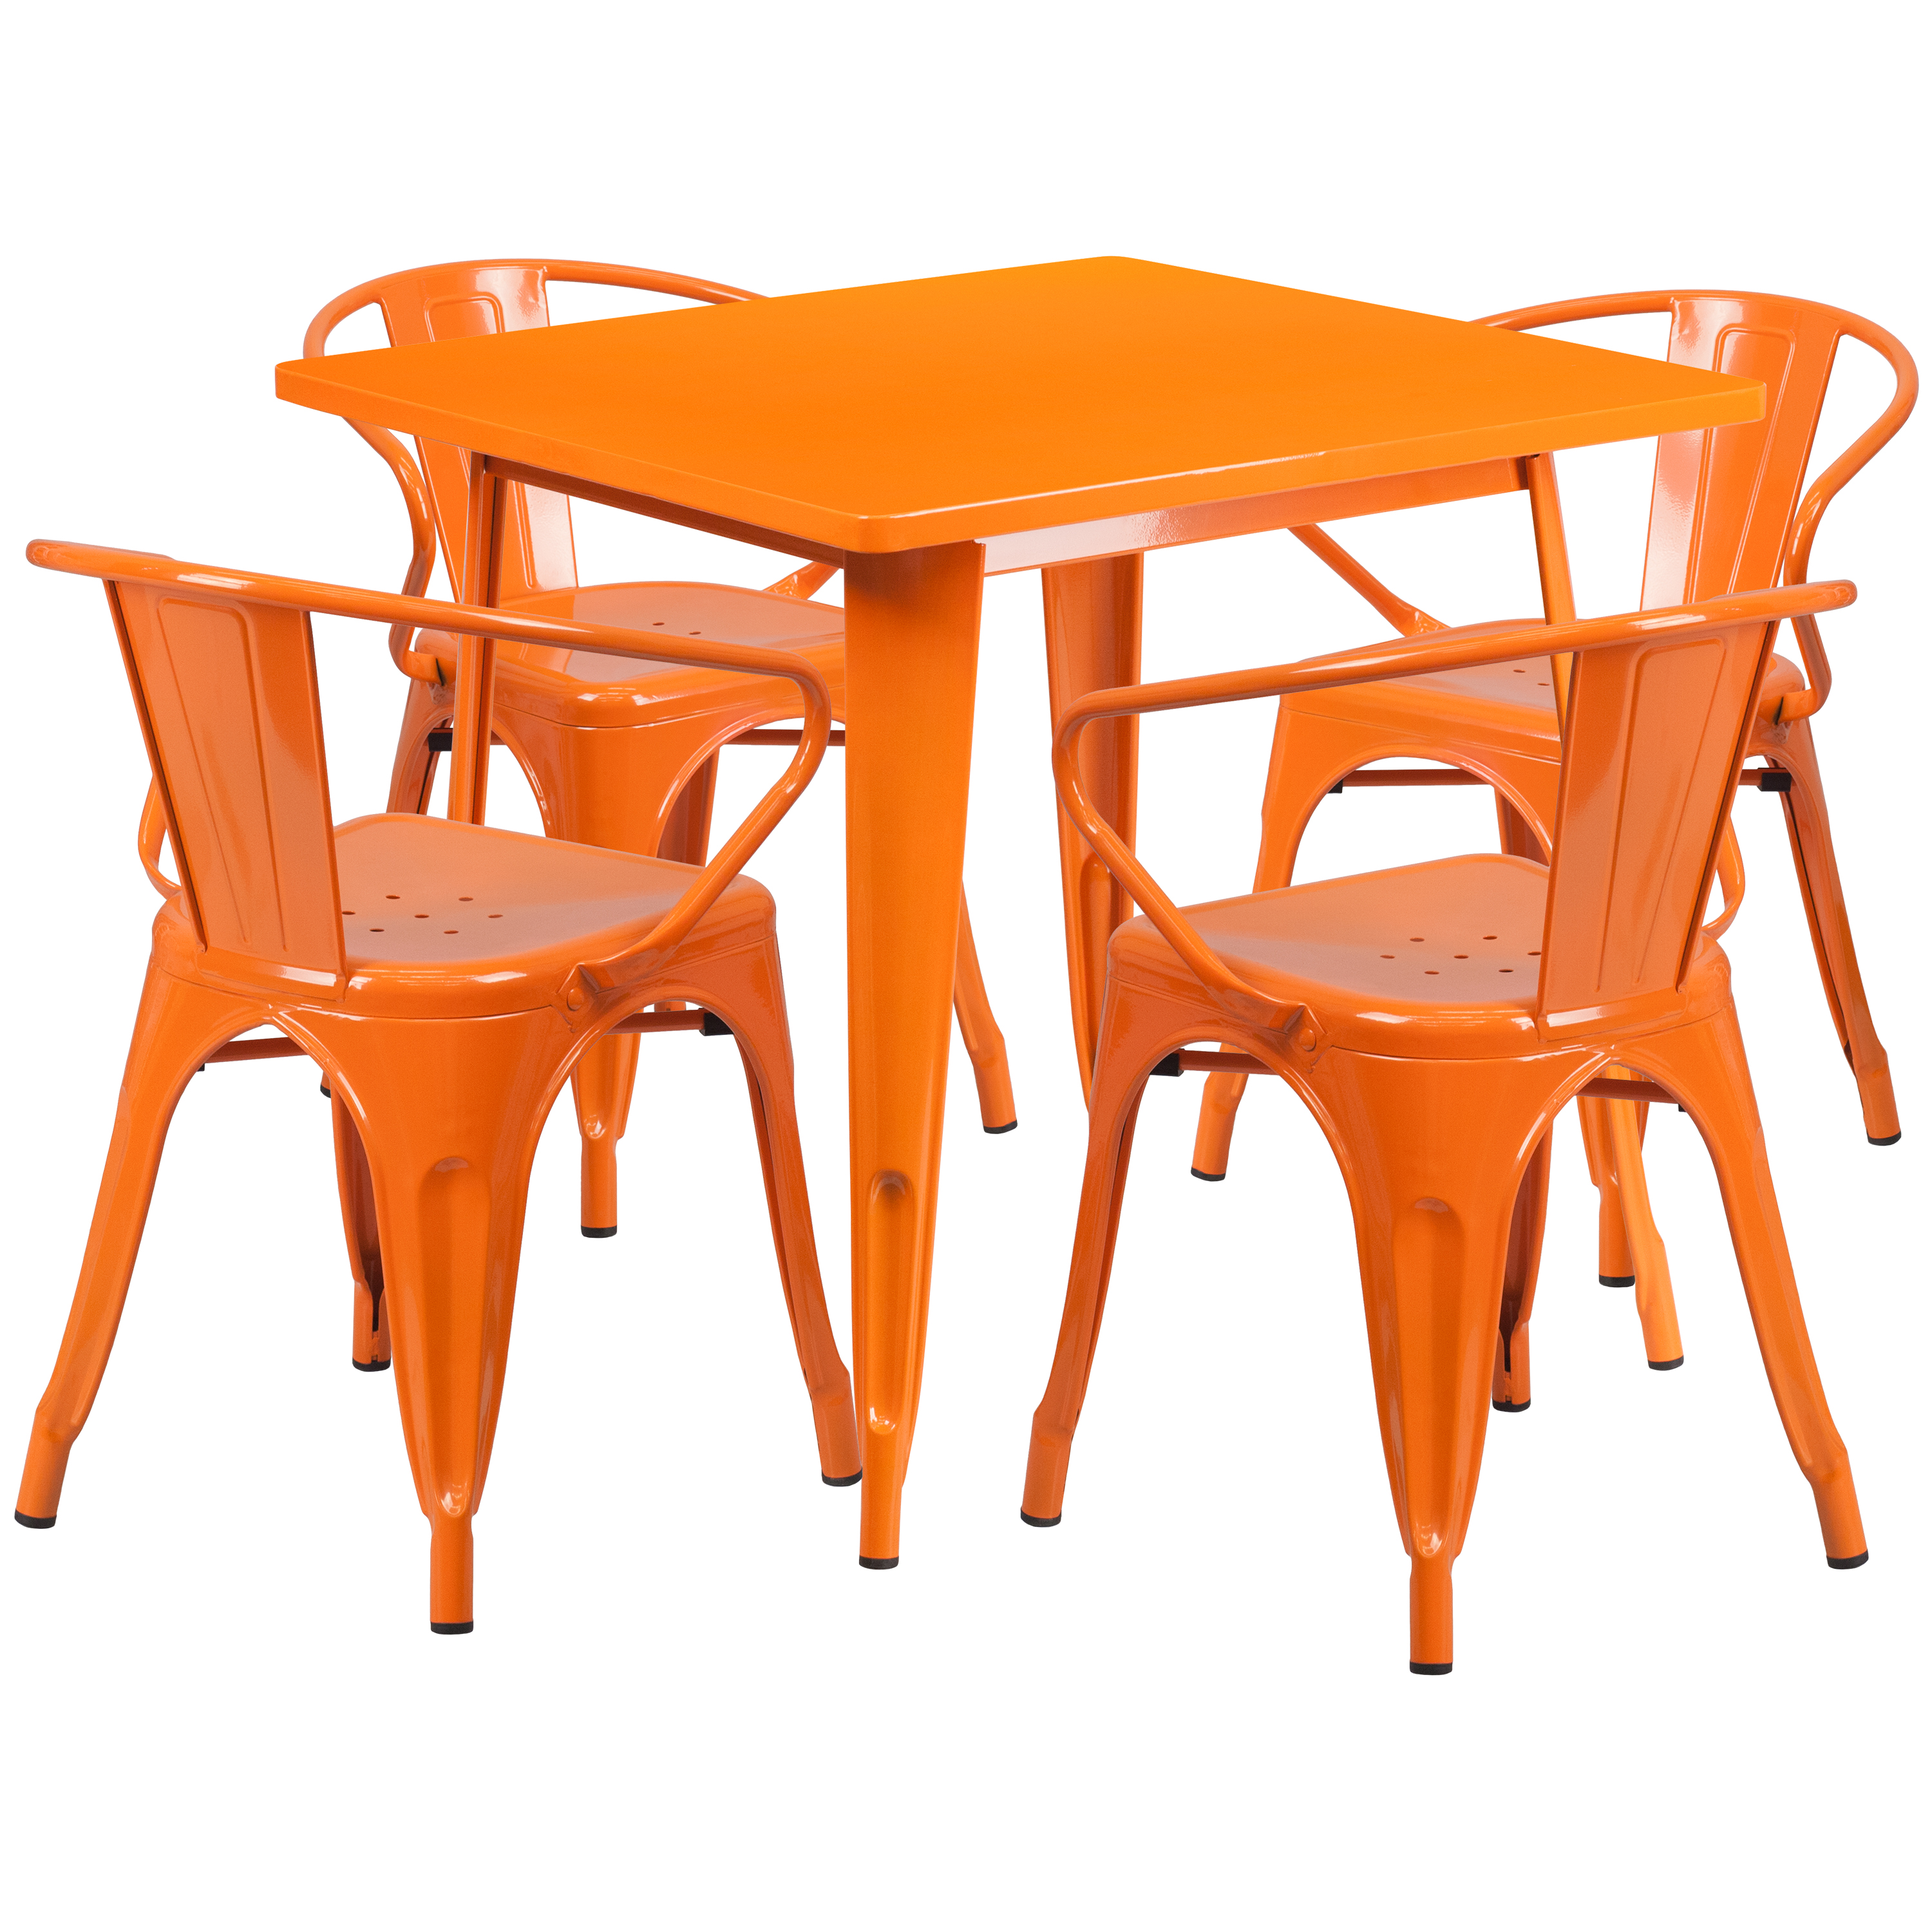 Flash Furniture Commercial Grade 31.5" Square Orange Metal Indoor-Outdoor Table Set with 4 Arm Chairs - image 2 of 5